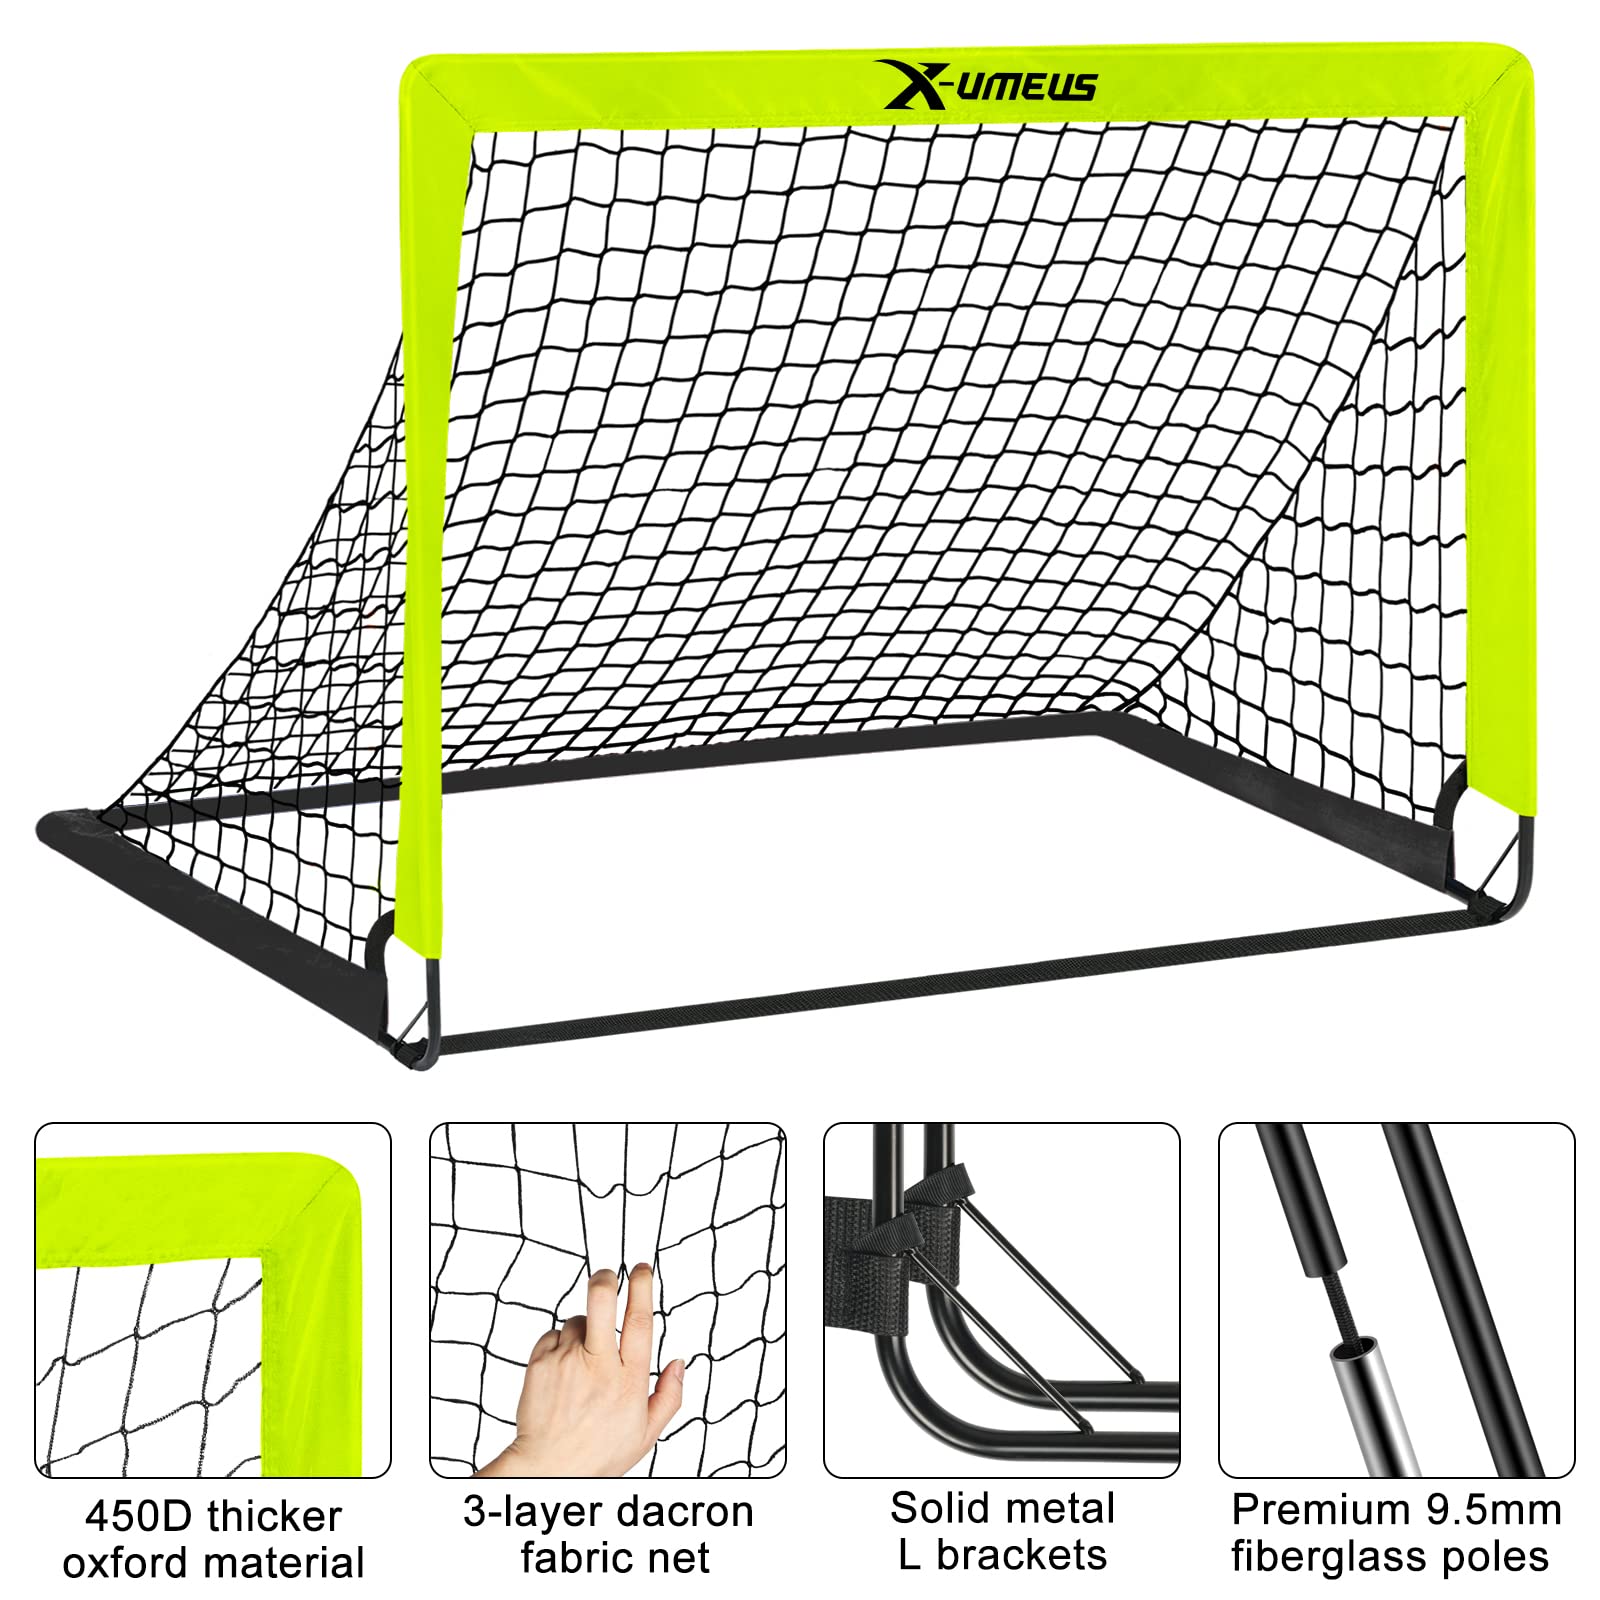 Kids Soccer Goals for Backyard, 4' x 3' Pop Up Toddler Soccer Goal Training Equipment with Soccer Ball, Agility Ladder and Cones, Portable Soccer Nets for Backyard for Kids Youth Outdoor Sports Games